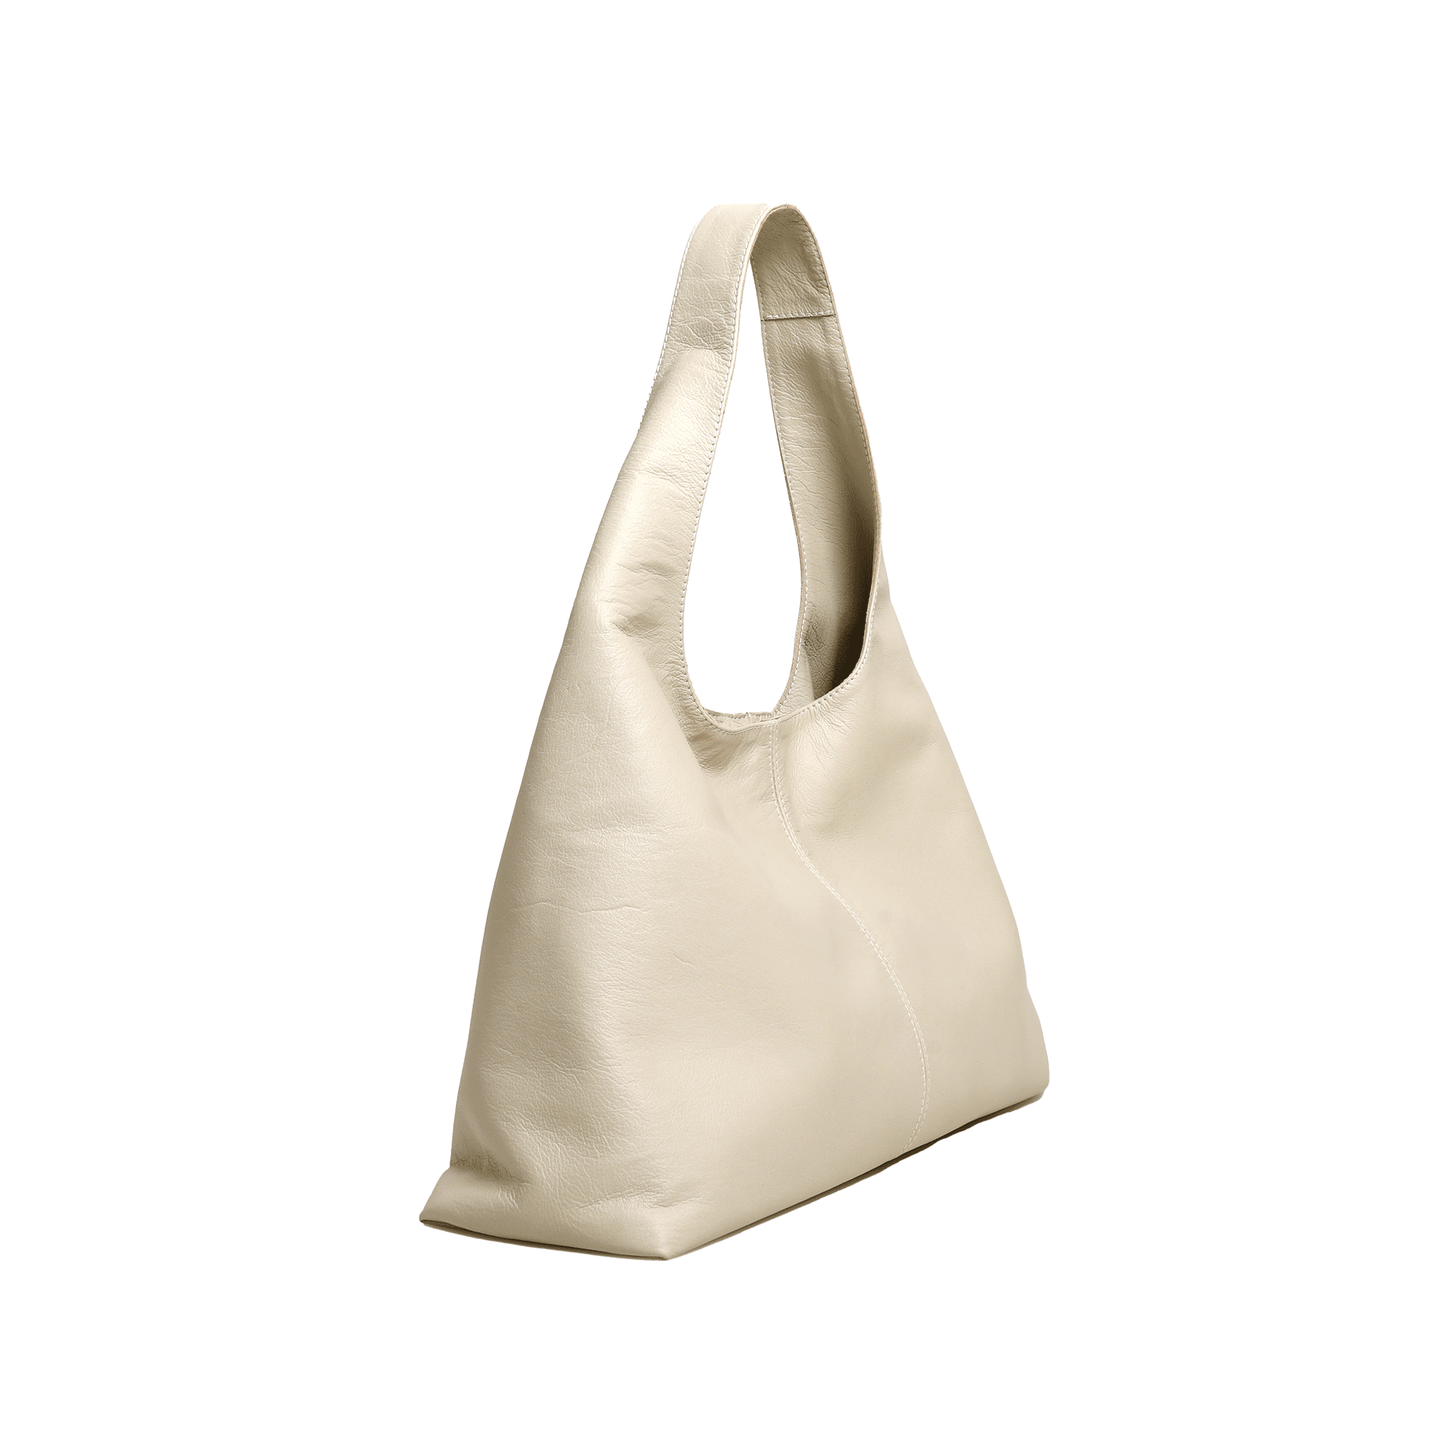 Hibiscus Leather Hobo Bag - Ghost Gum